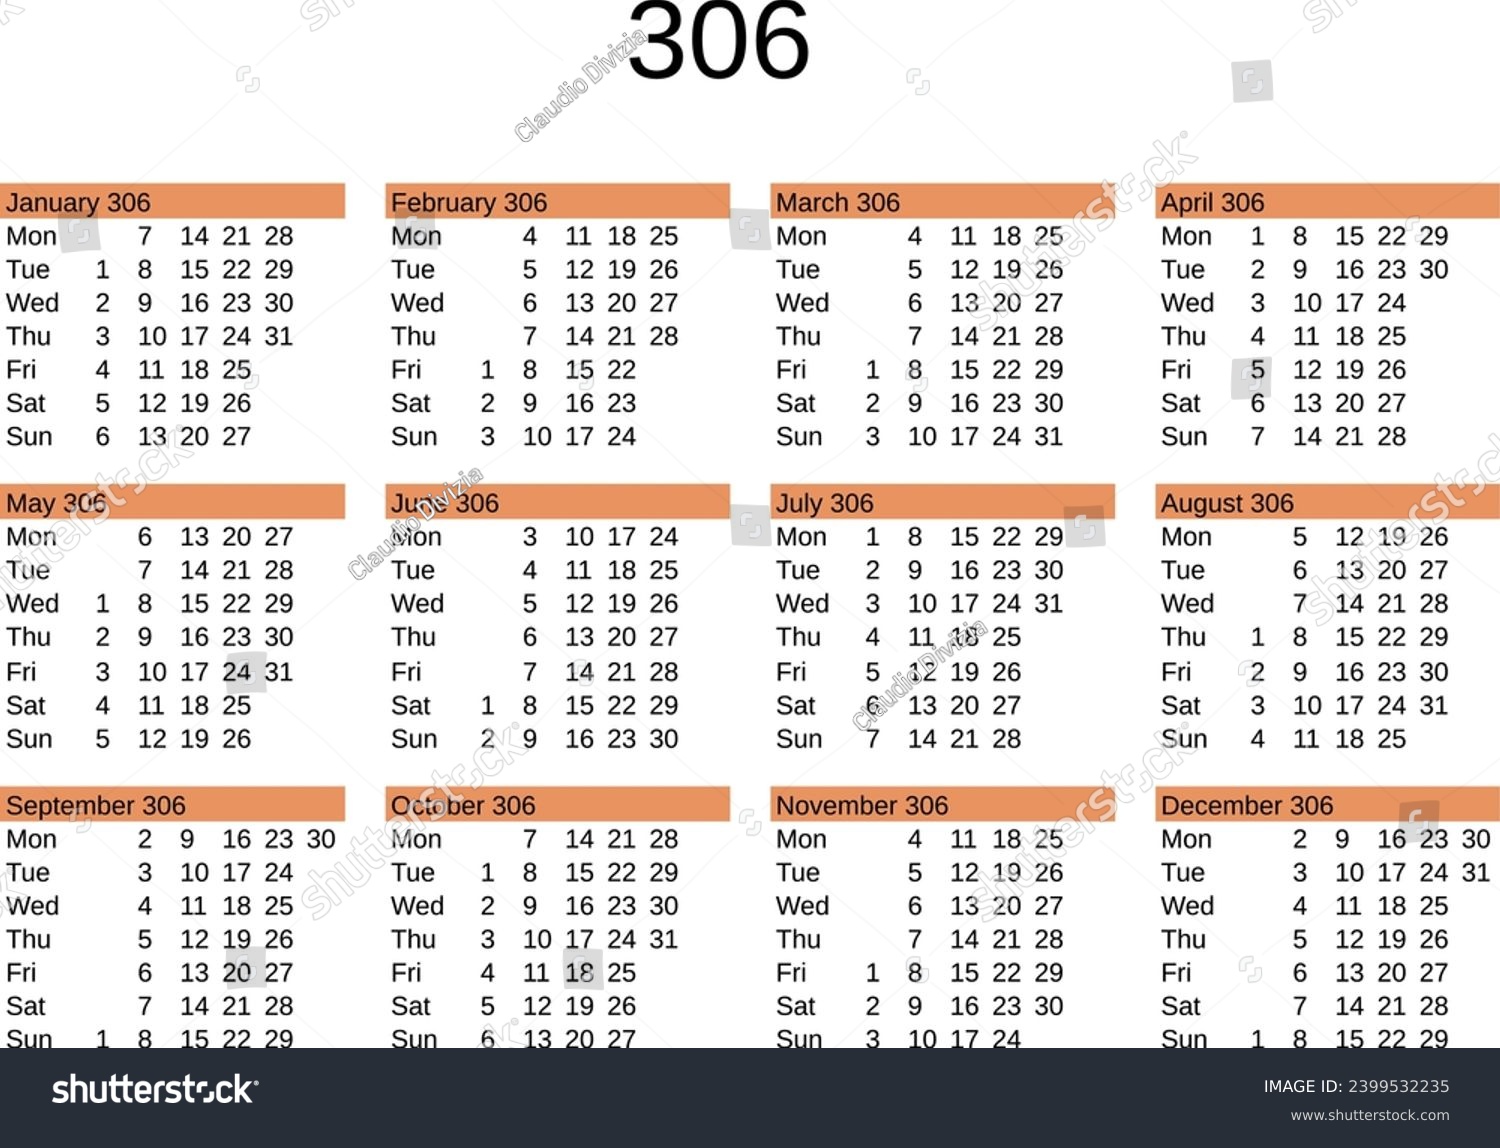 SVG of calendar of year 306 in English language svg